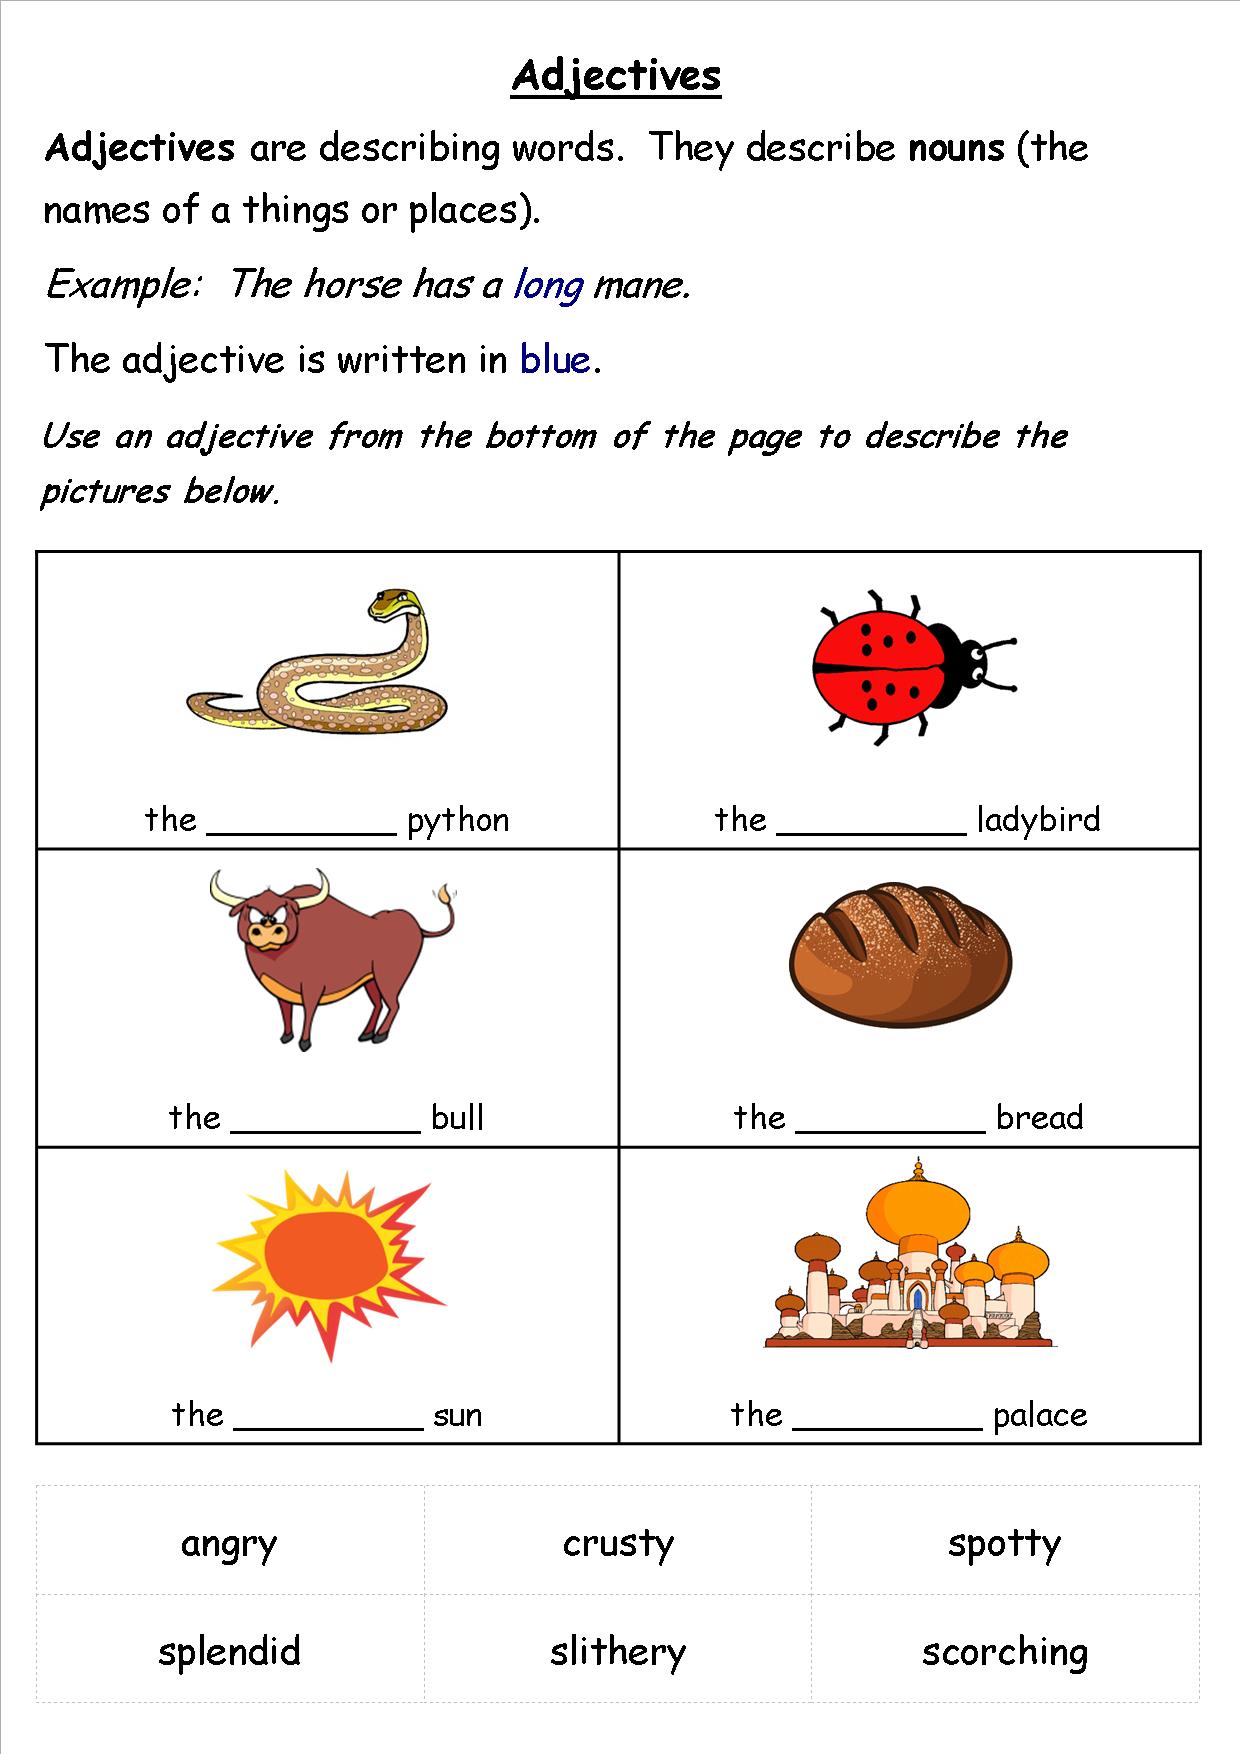 nouns-and-verbs-worksheet-ks1-by-mignonmiller-teaching-compound-words-nouns-verbs-adjectives